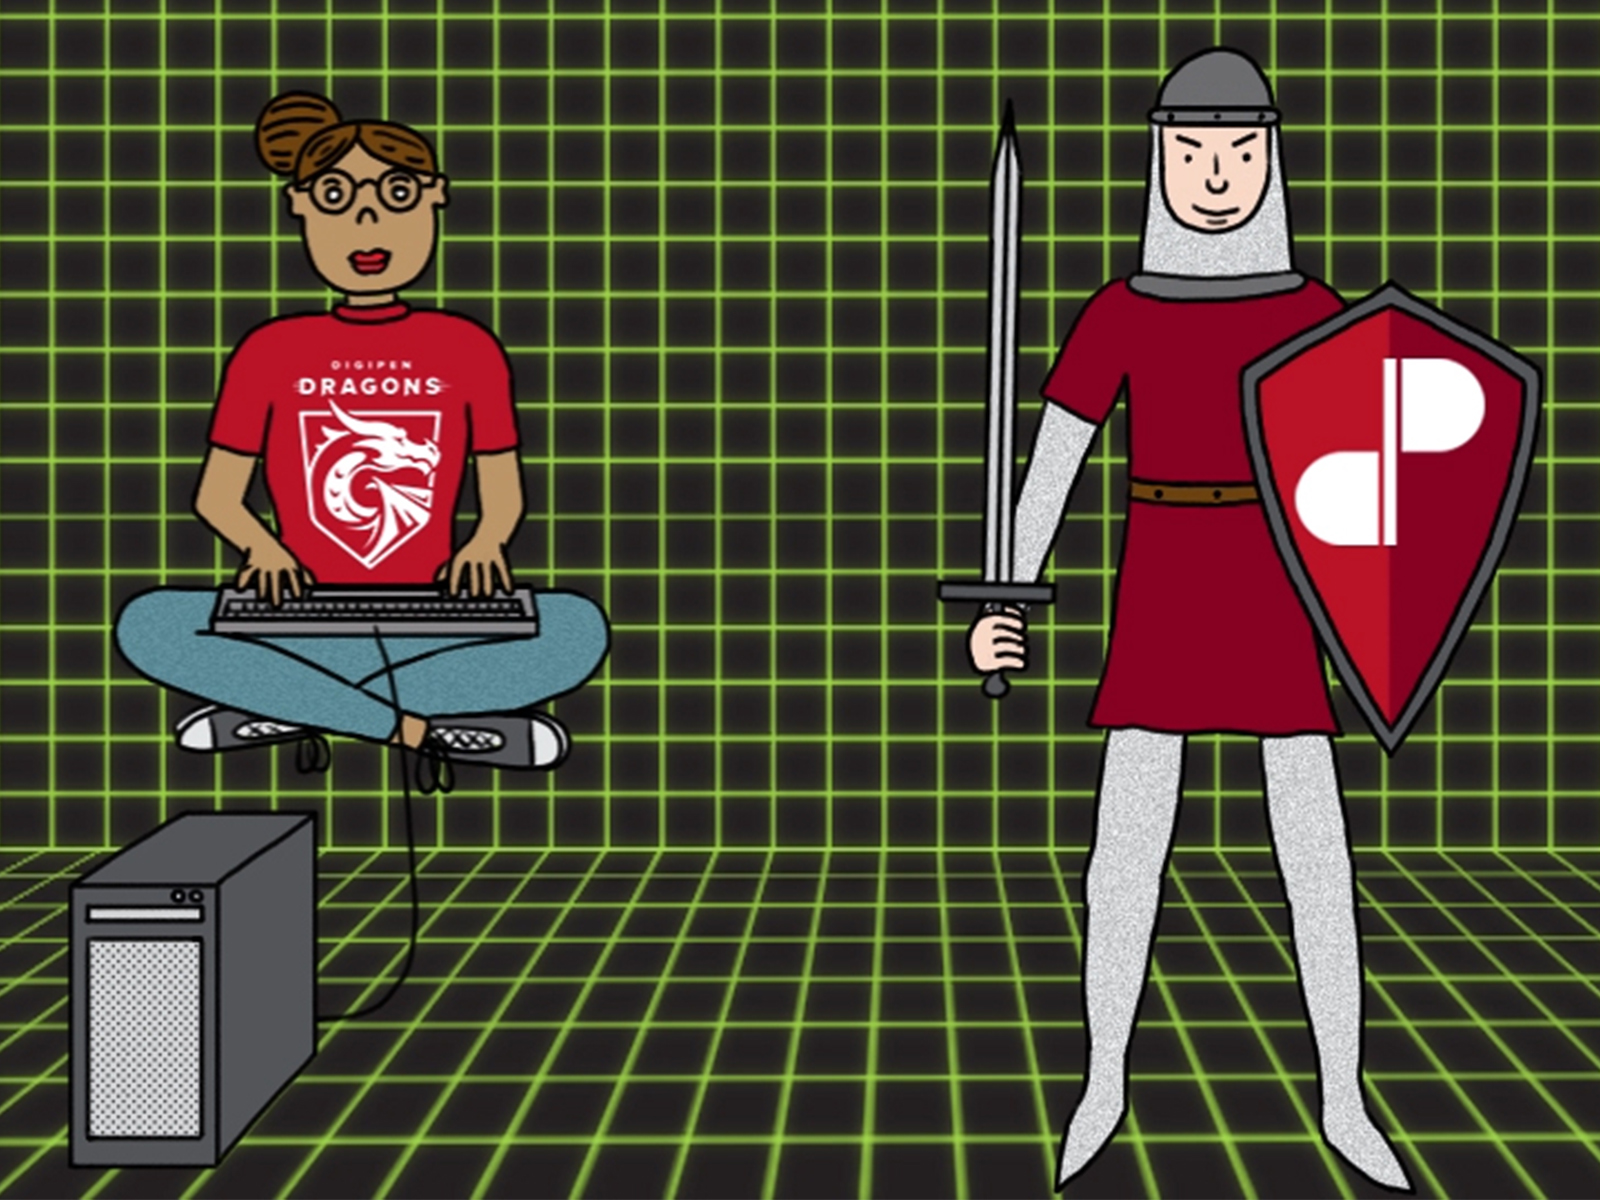 A DigiPen student levitates and codes in a green digital space next to a knight with a DigiPen shield.